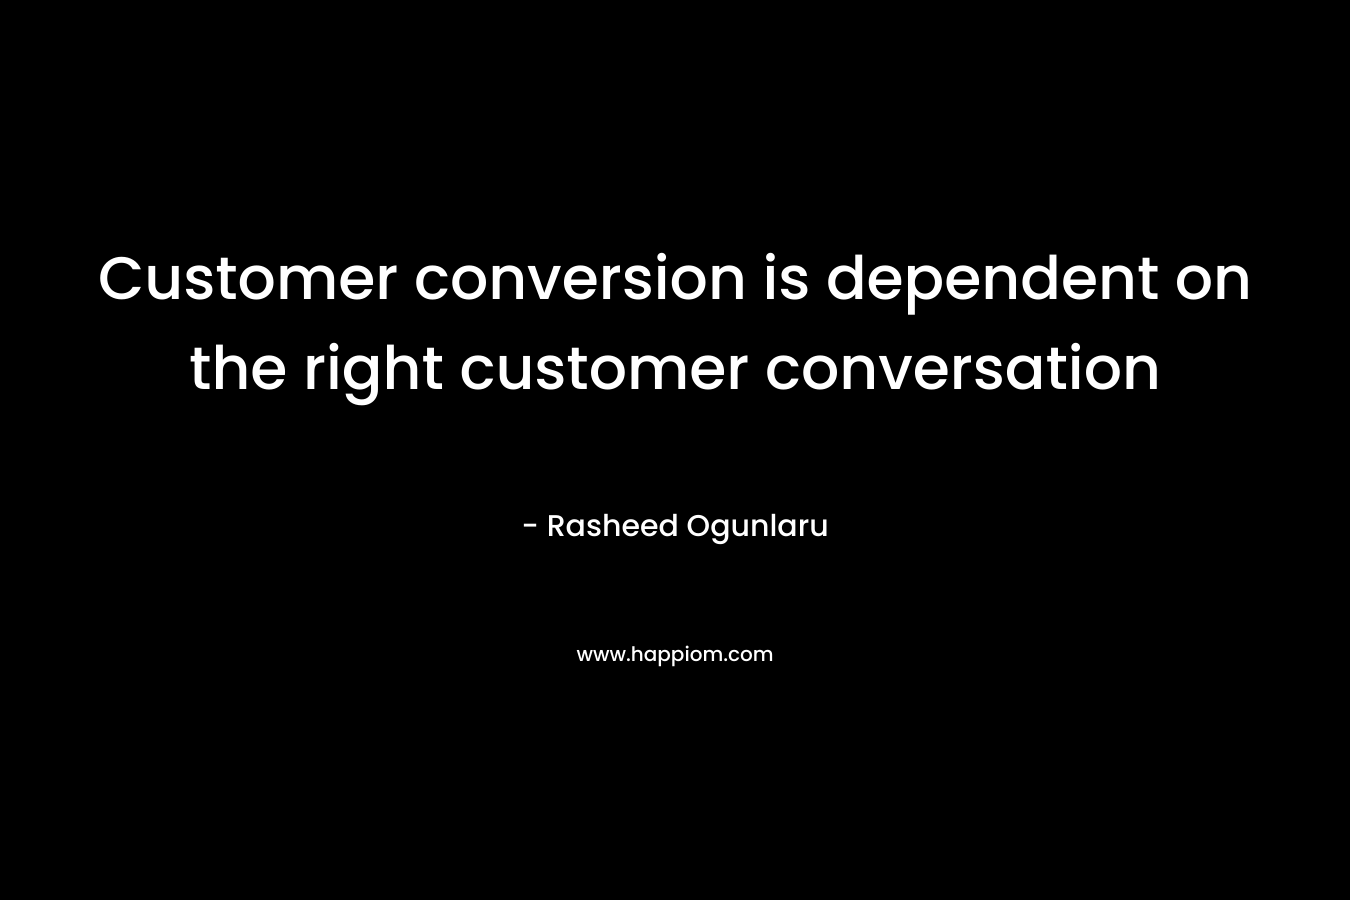 Customer conversion is dependent on the right customer conversation